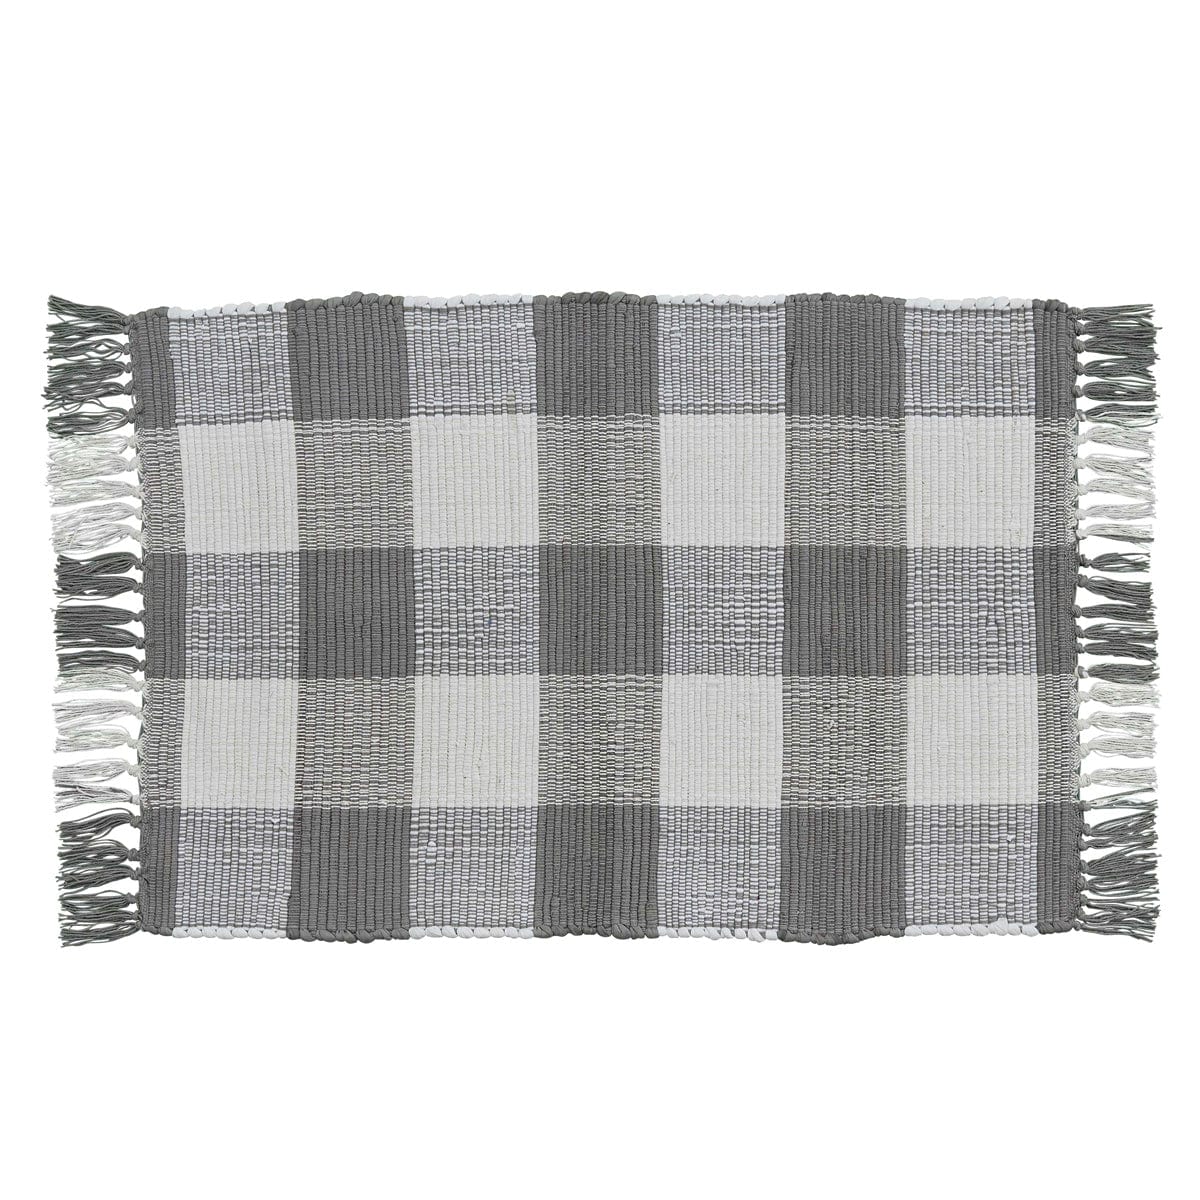 Wicklow Check in Dove Gray Woven rug 24&quot; x 36&quot; rectangle-Park Designs-The Village Merchant